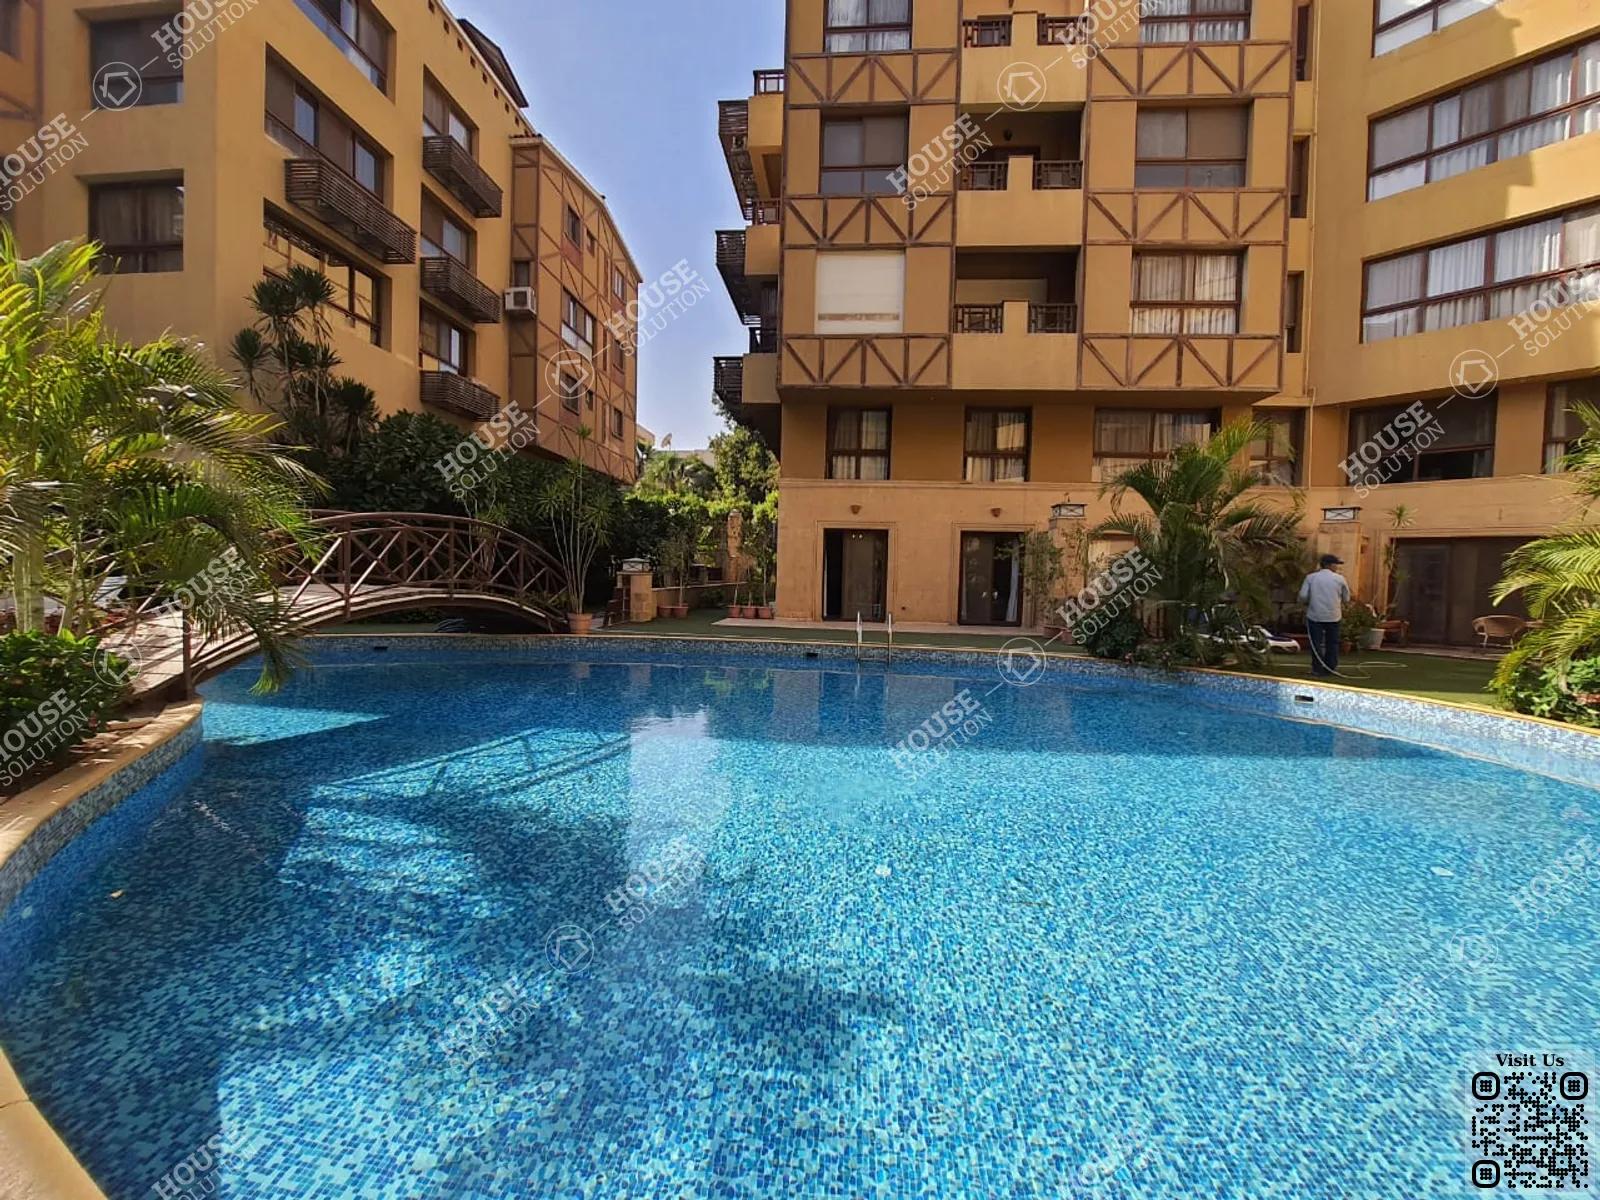 SHARED SWIMMING POOL  @ Apartments For Rent In Maadi Maadi Sarayat Area: 350 m² consists of 4 Bedrooms 4 Bathrooms Modern furnished 5 stars #5530-0